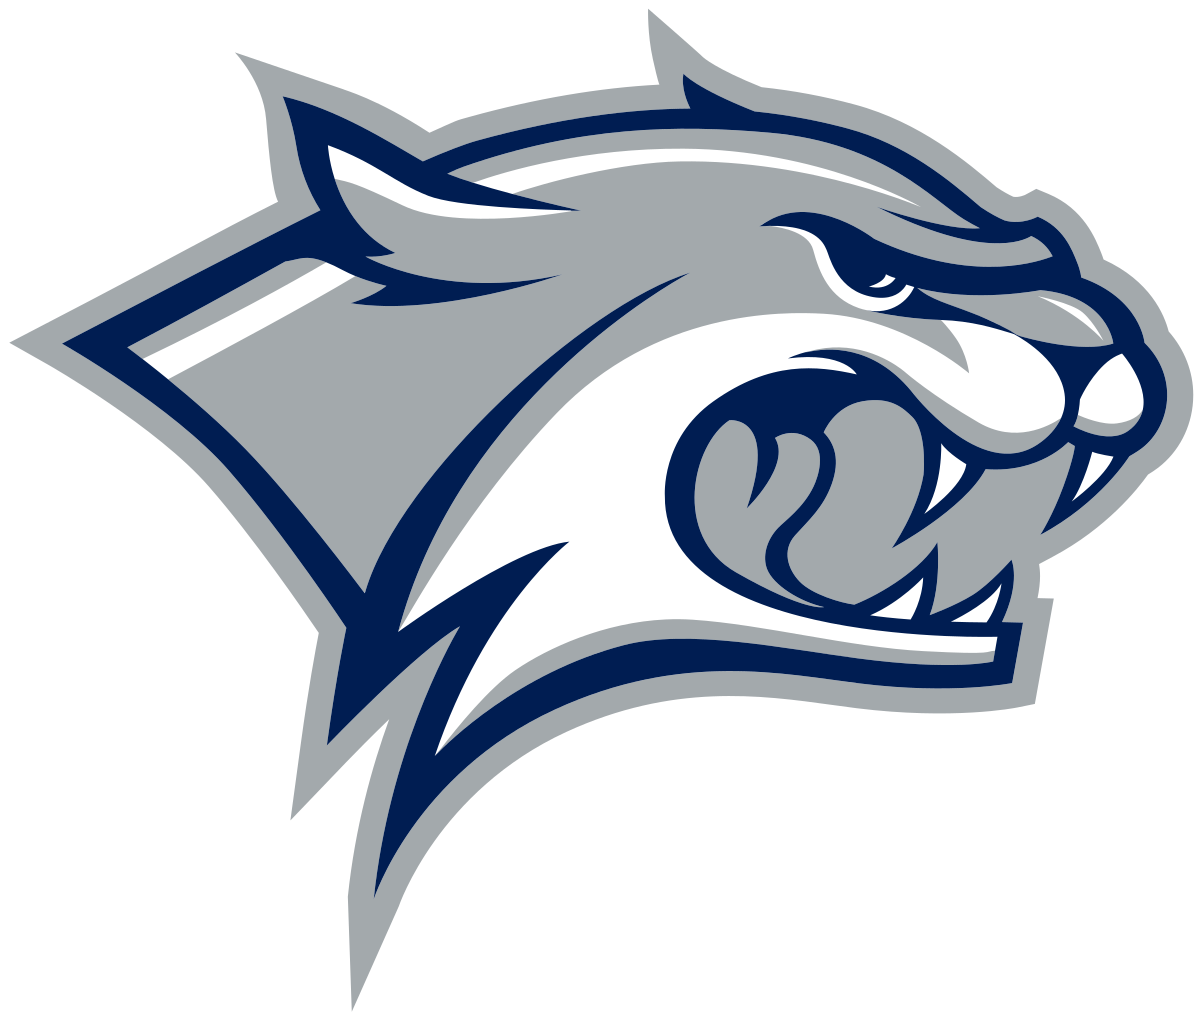 Sizing up the wildcats. Wildcat clipart transparent